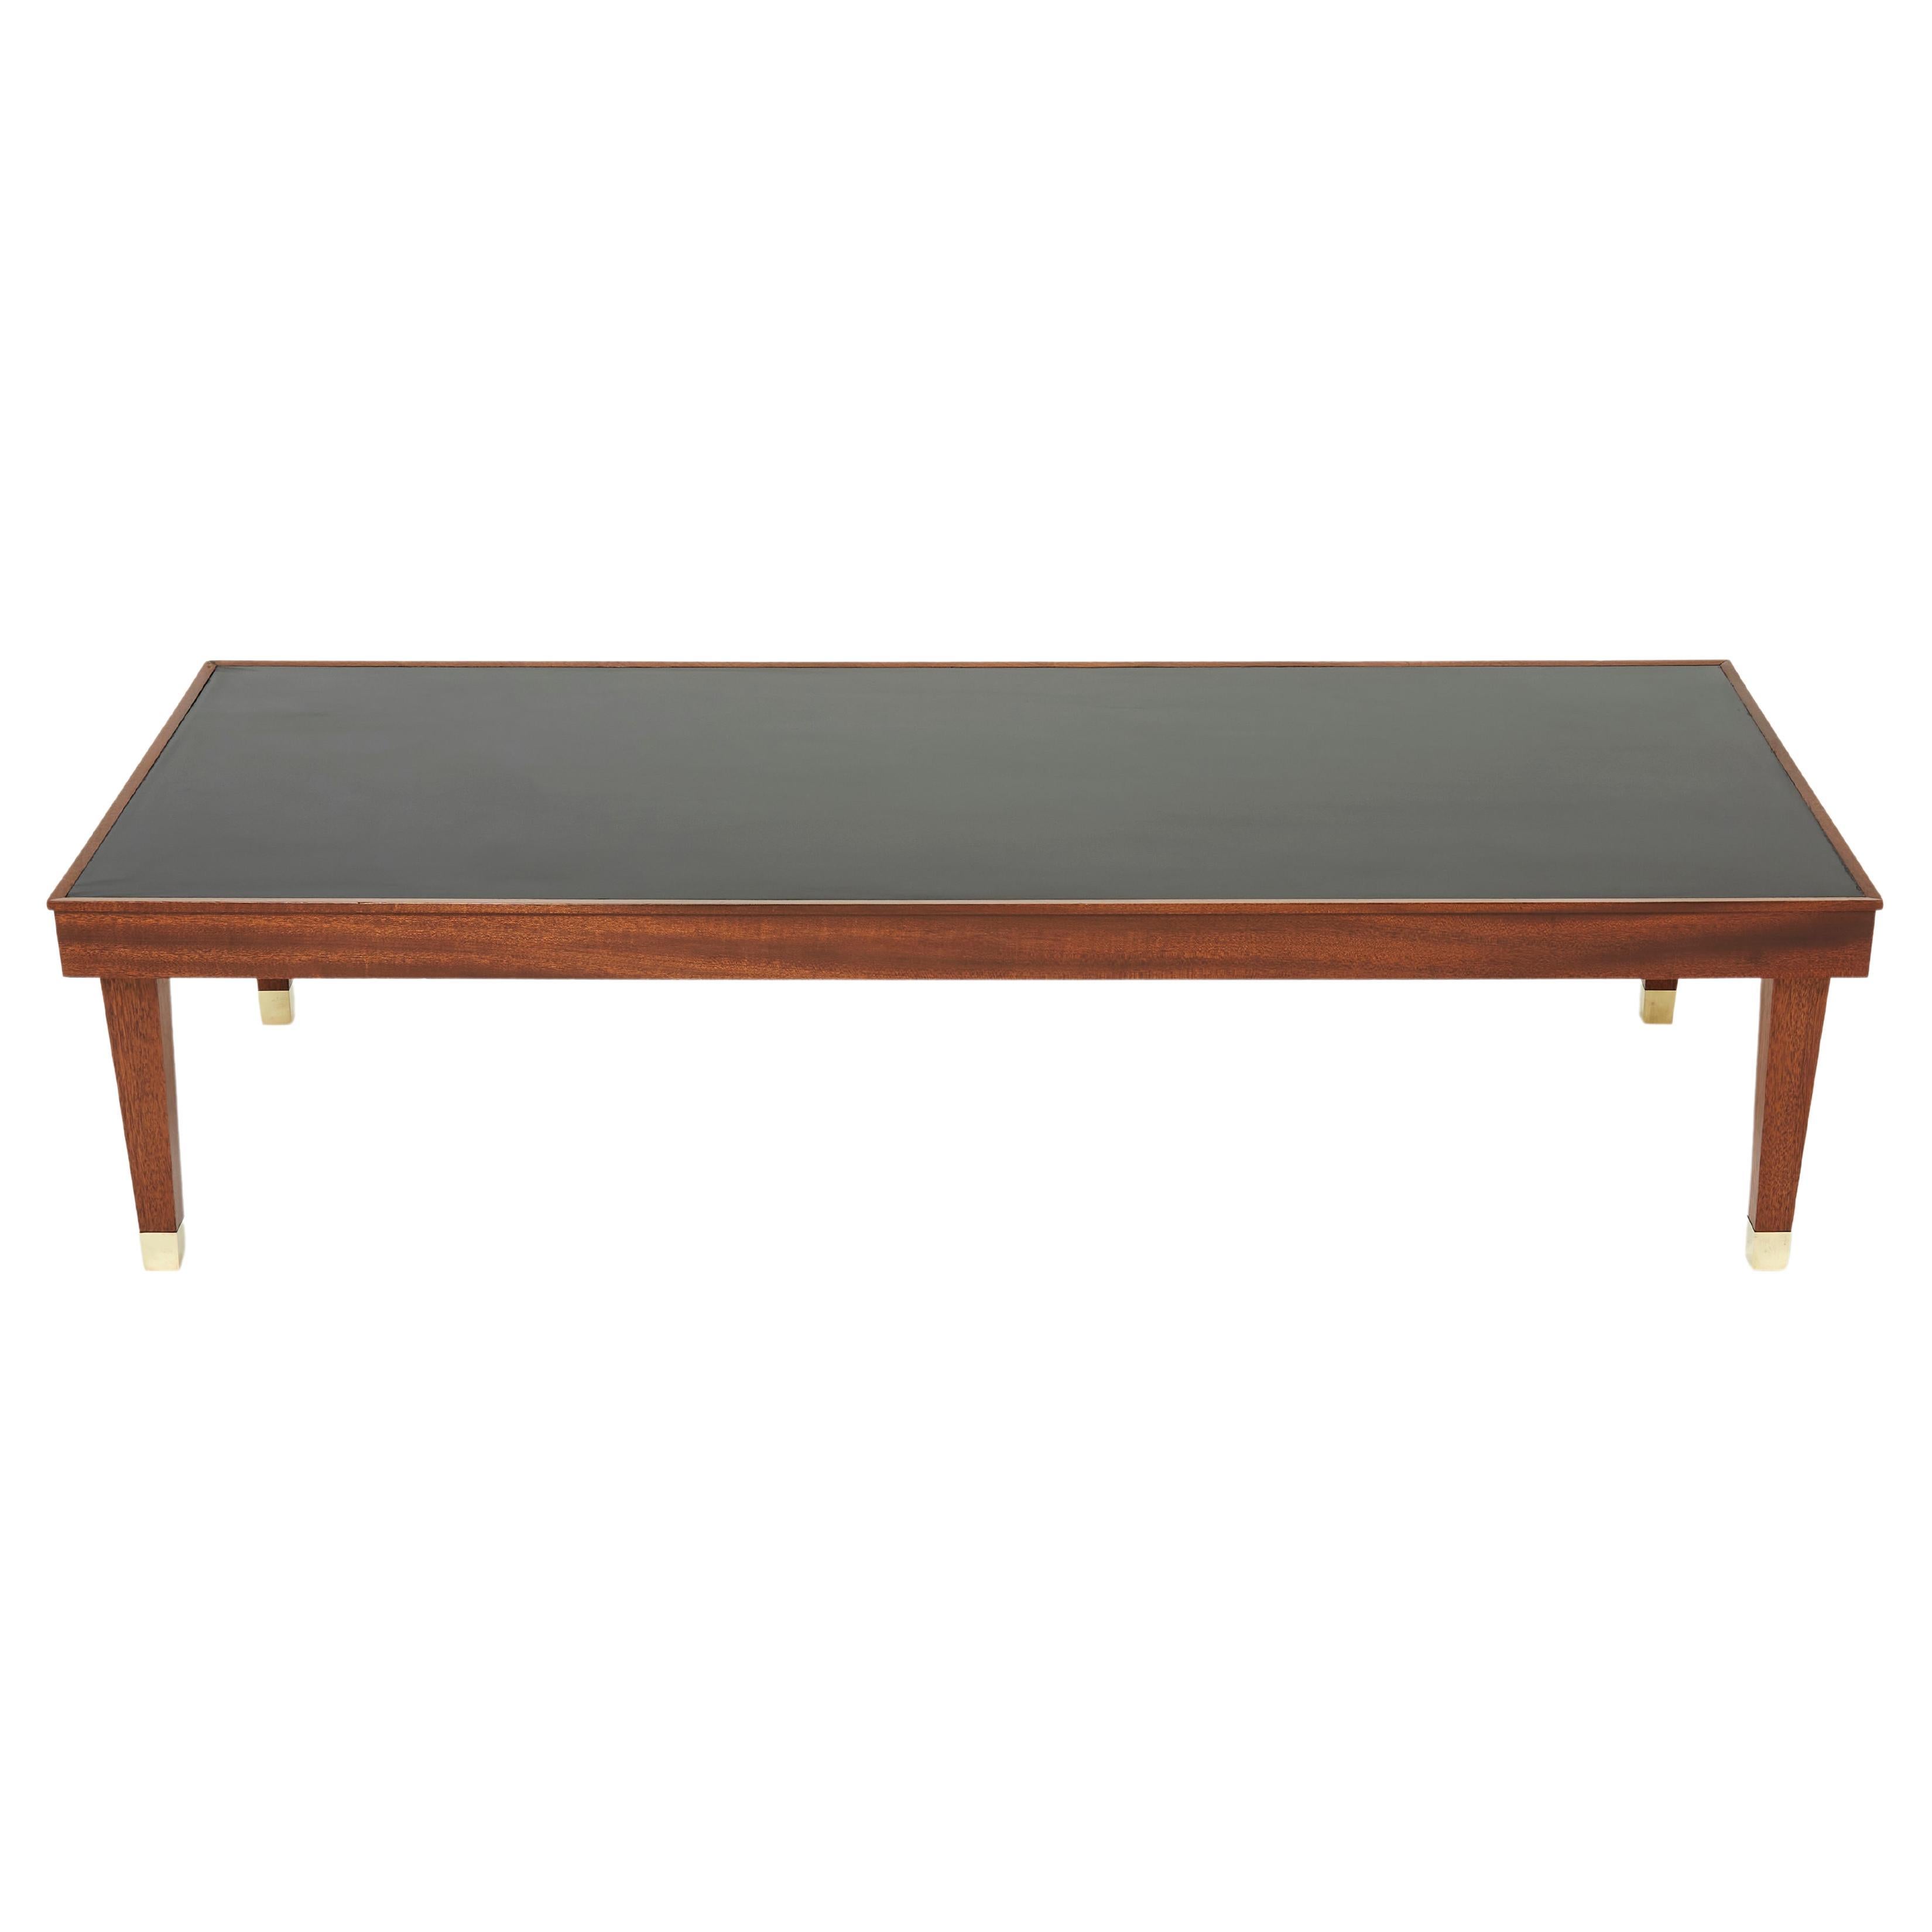 Jacques Adnet Mahogany Brass Modernist Coffee Table, 1950s